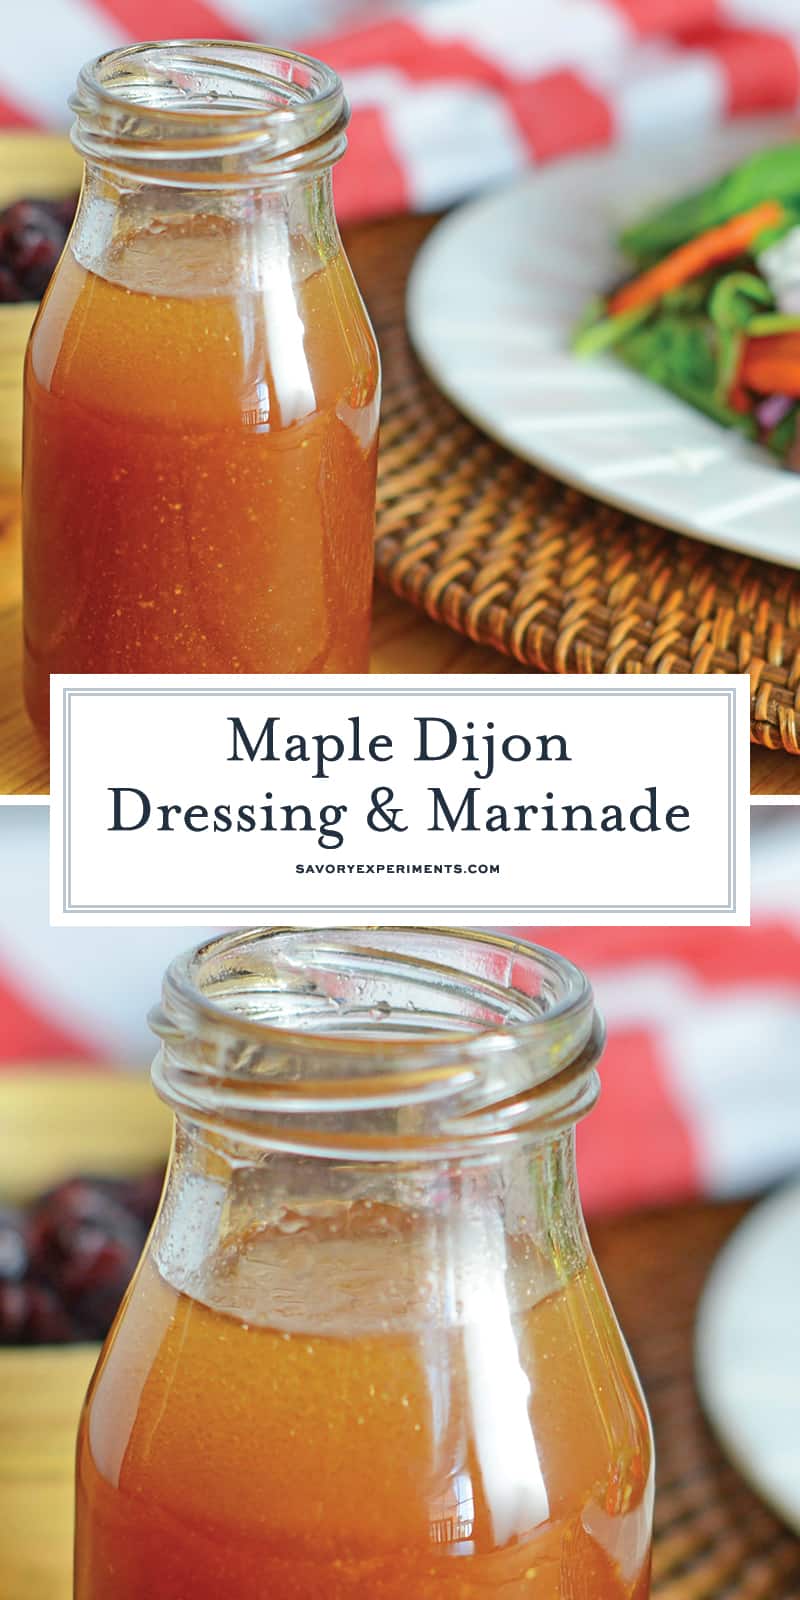 Maple Dijon Dressing is a tasty and simple homemade salad dressing! This dressing with maple syrup will complement any salad or grilled vegetable platter! #dressingwithmaplesyrup #homemadesaladdressing #dijonvinaigrette www.savoryexperiments.com